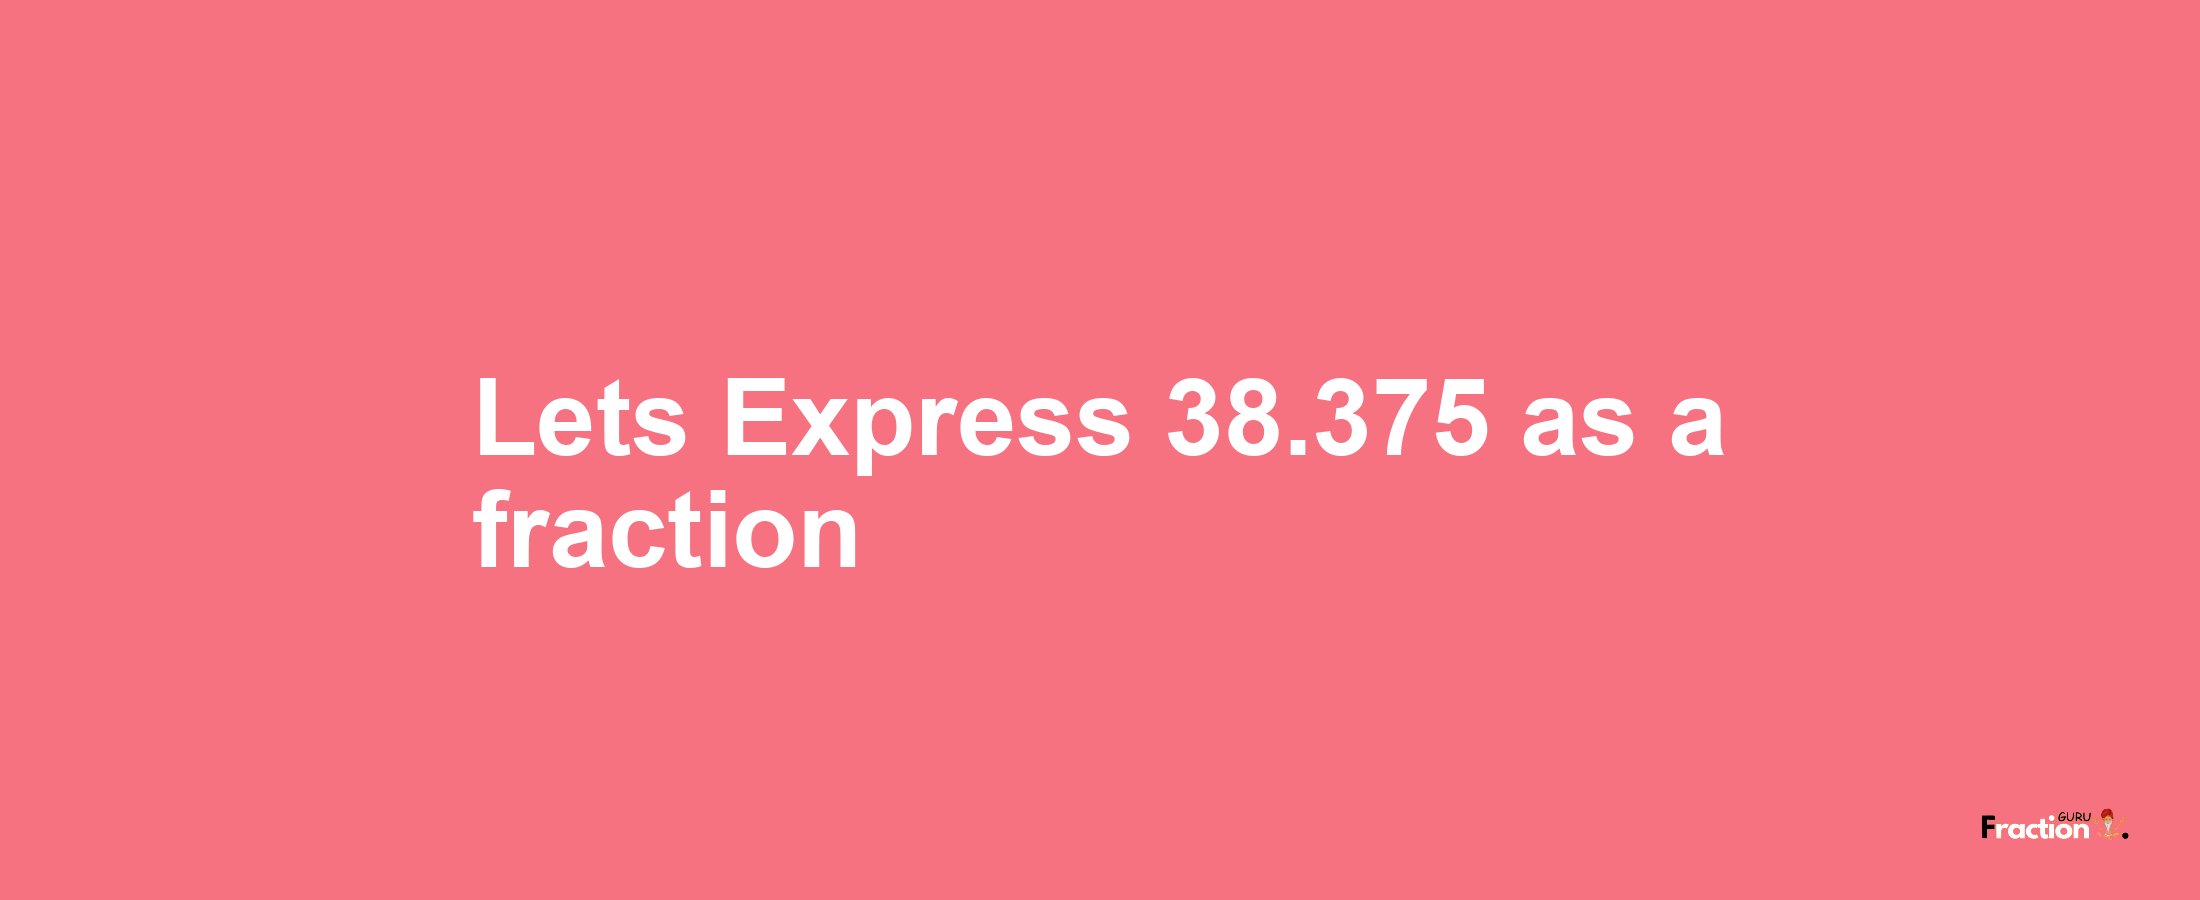 Lets Express 38.375 as afraction